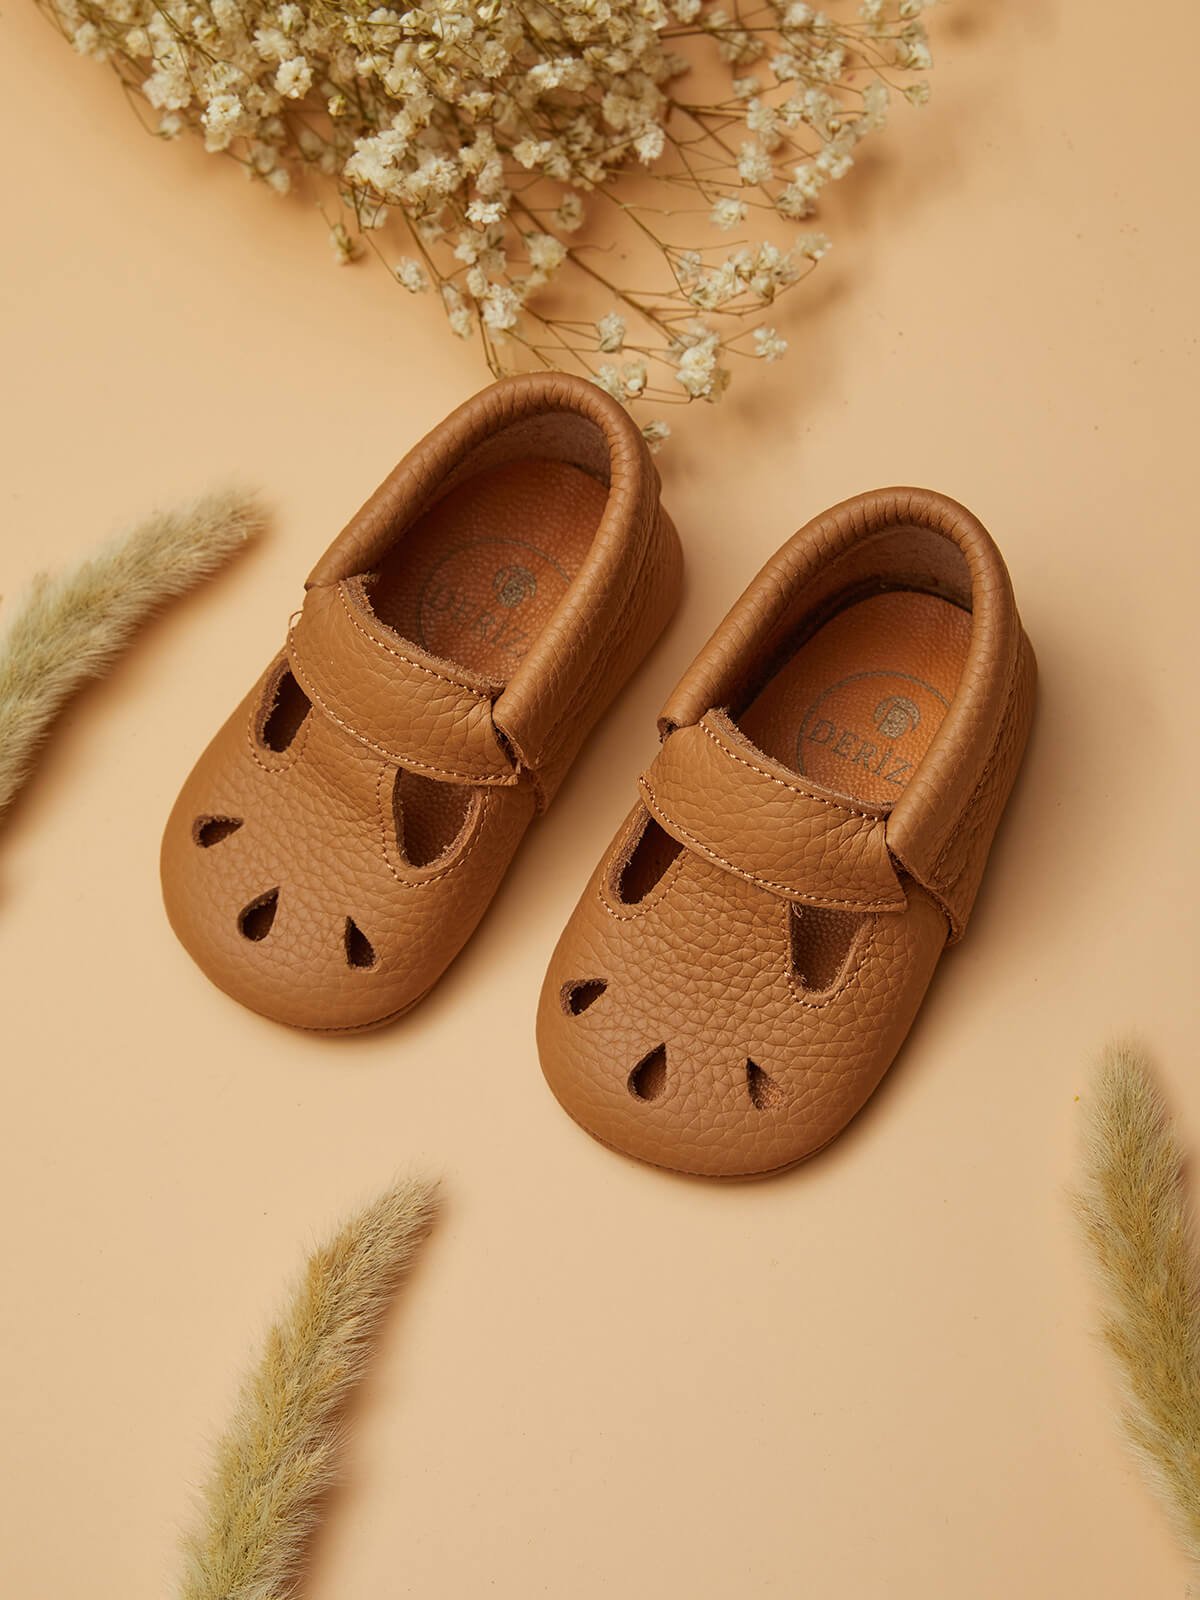 Tan Genuine Leather Baby Shoes